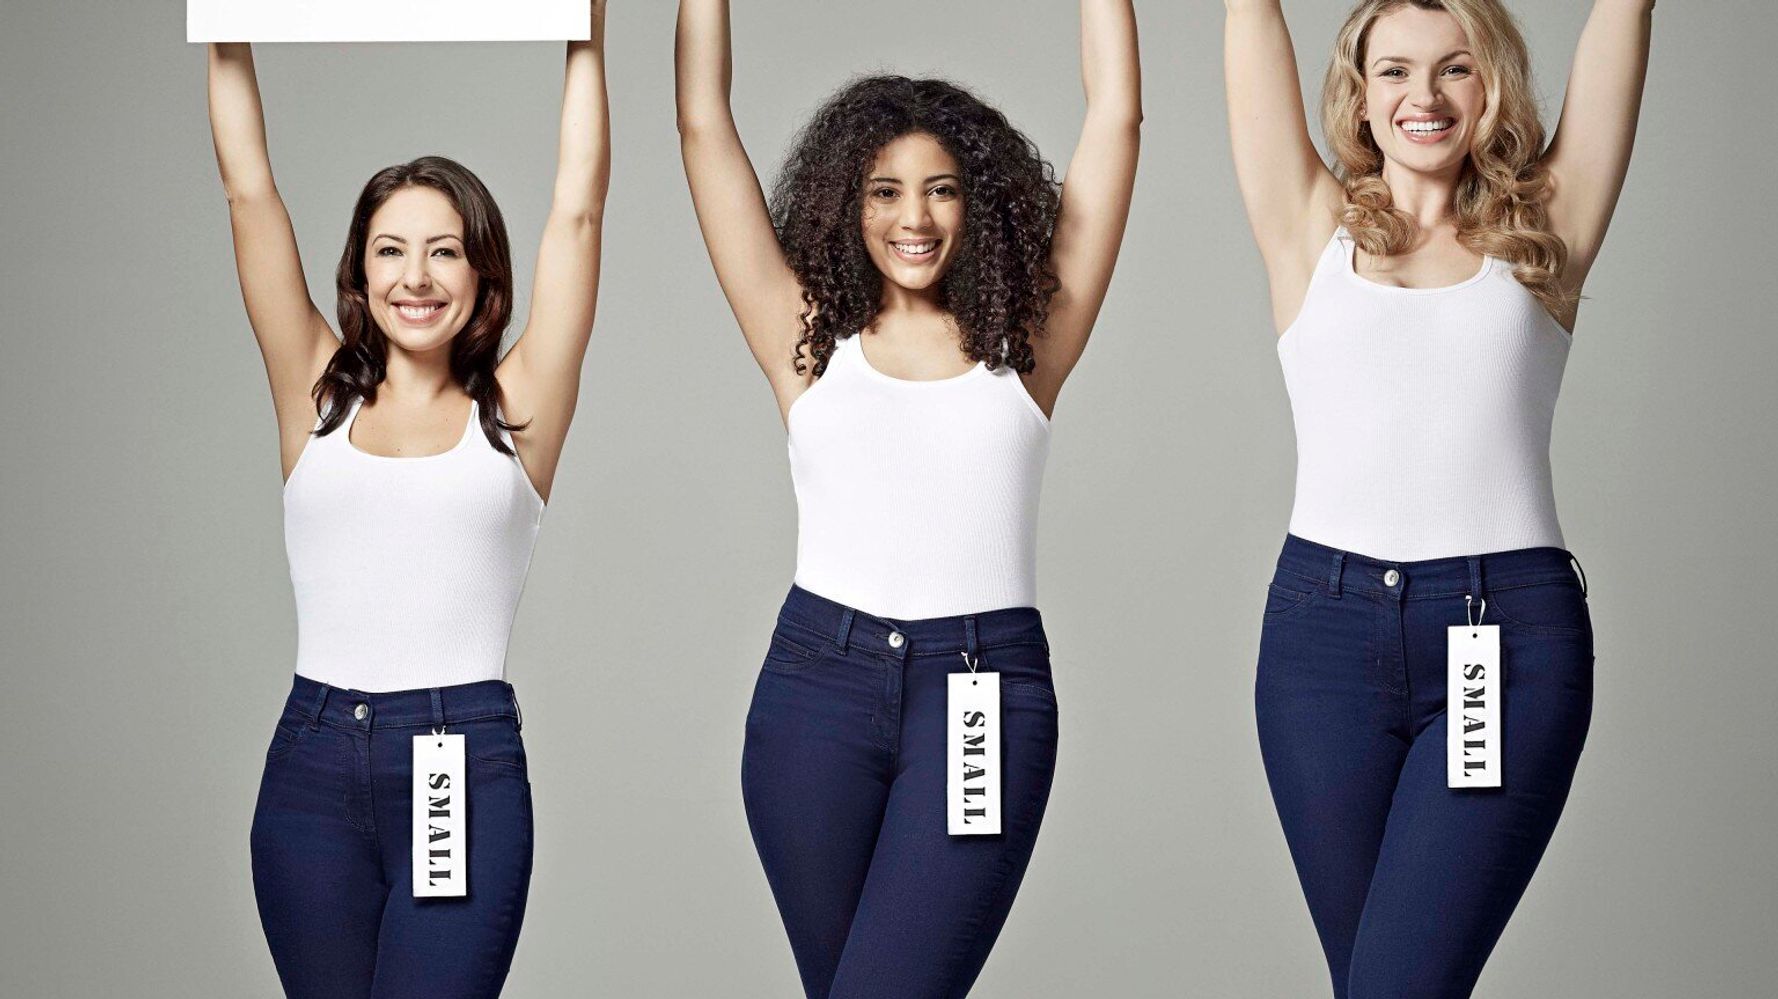 George launches Wonderfit Jeans which grow with you for up to three sizes